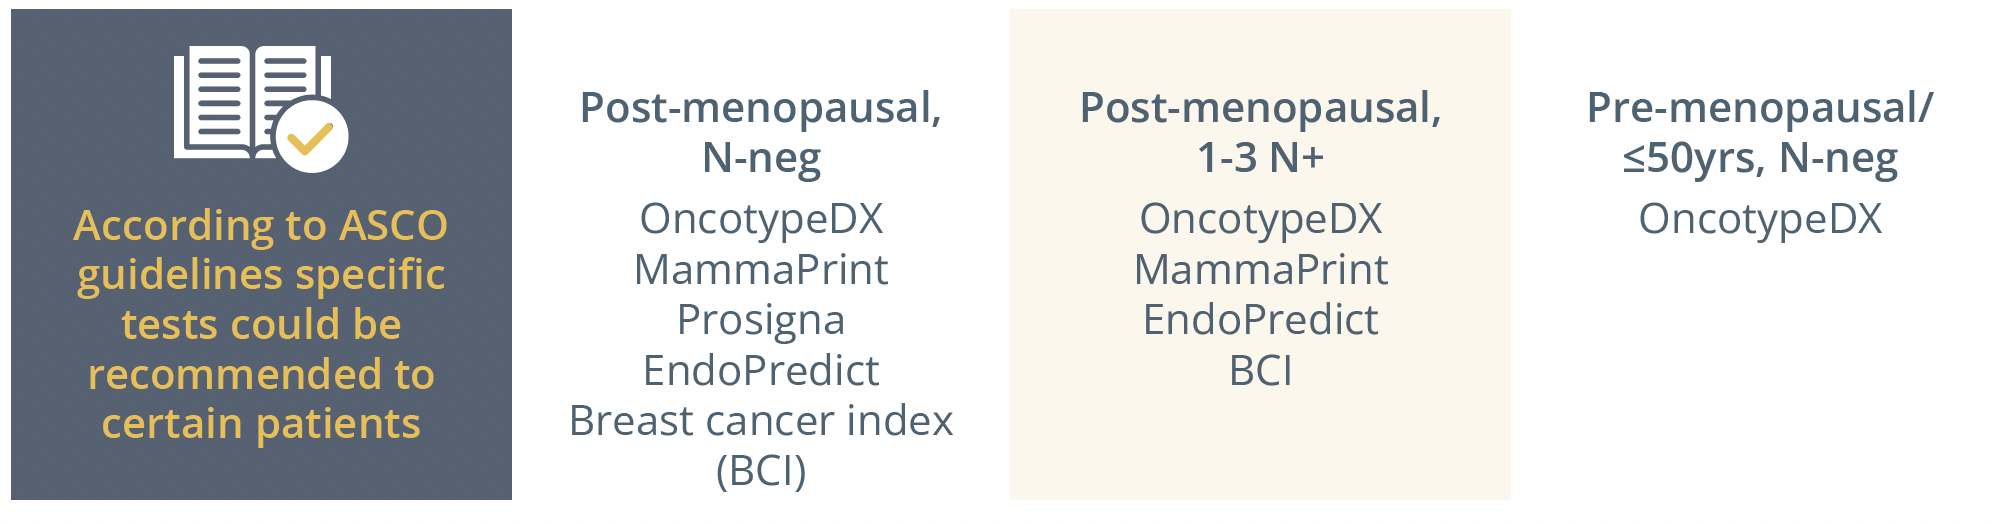 the genomic test recommendations according to ASCO guidelines for post-menopausal node negative patients